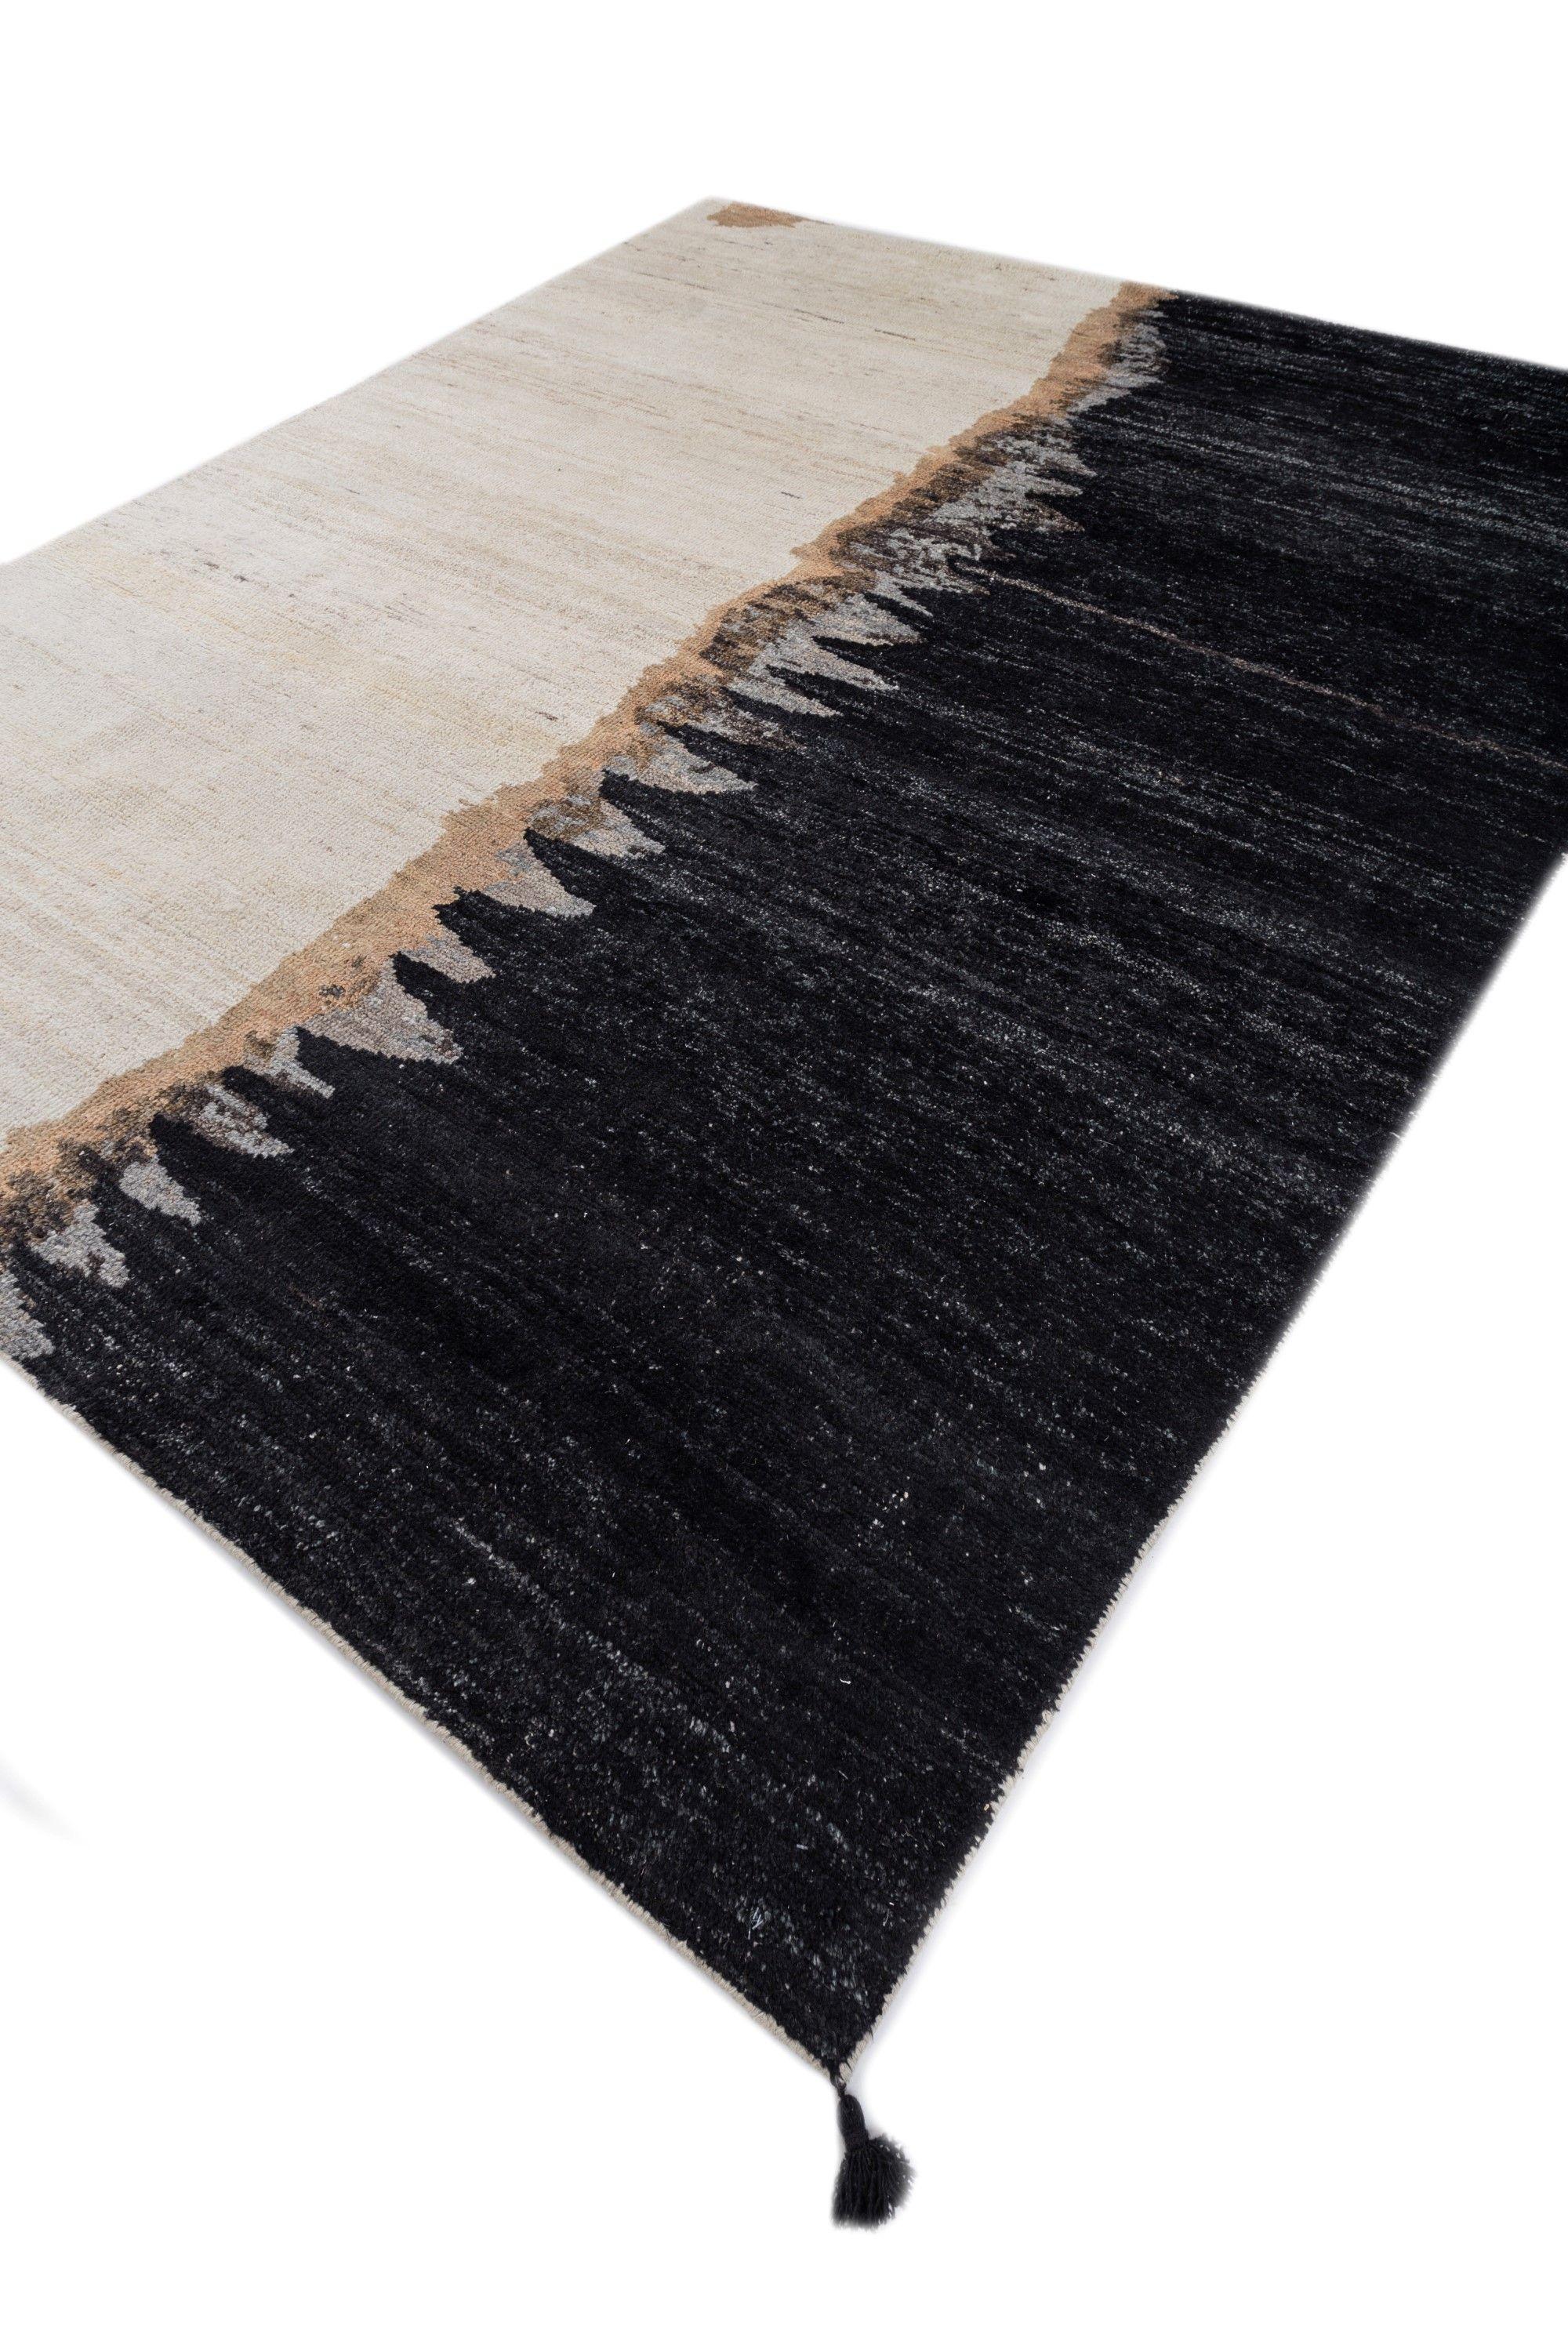 Modern Merging Ripples Vanilla & Ebony 240x300 cm Hand Knotted Rugs For Sale